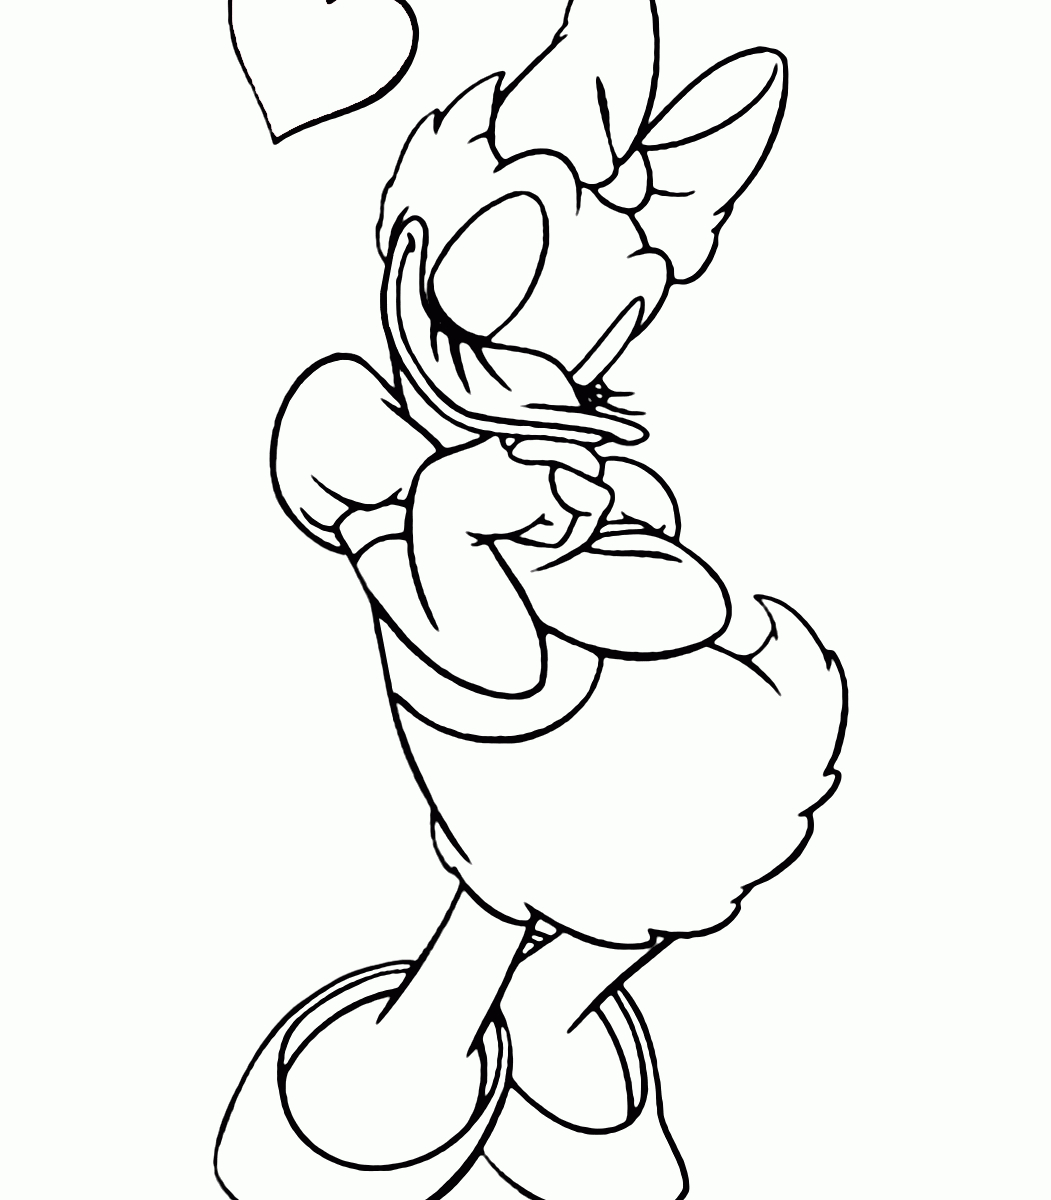 Elmer Fudd Coloring Pages Elmer Fudd Coloring Pages Road Runner Coloring Pages Of Tunes Babies